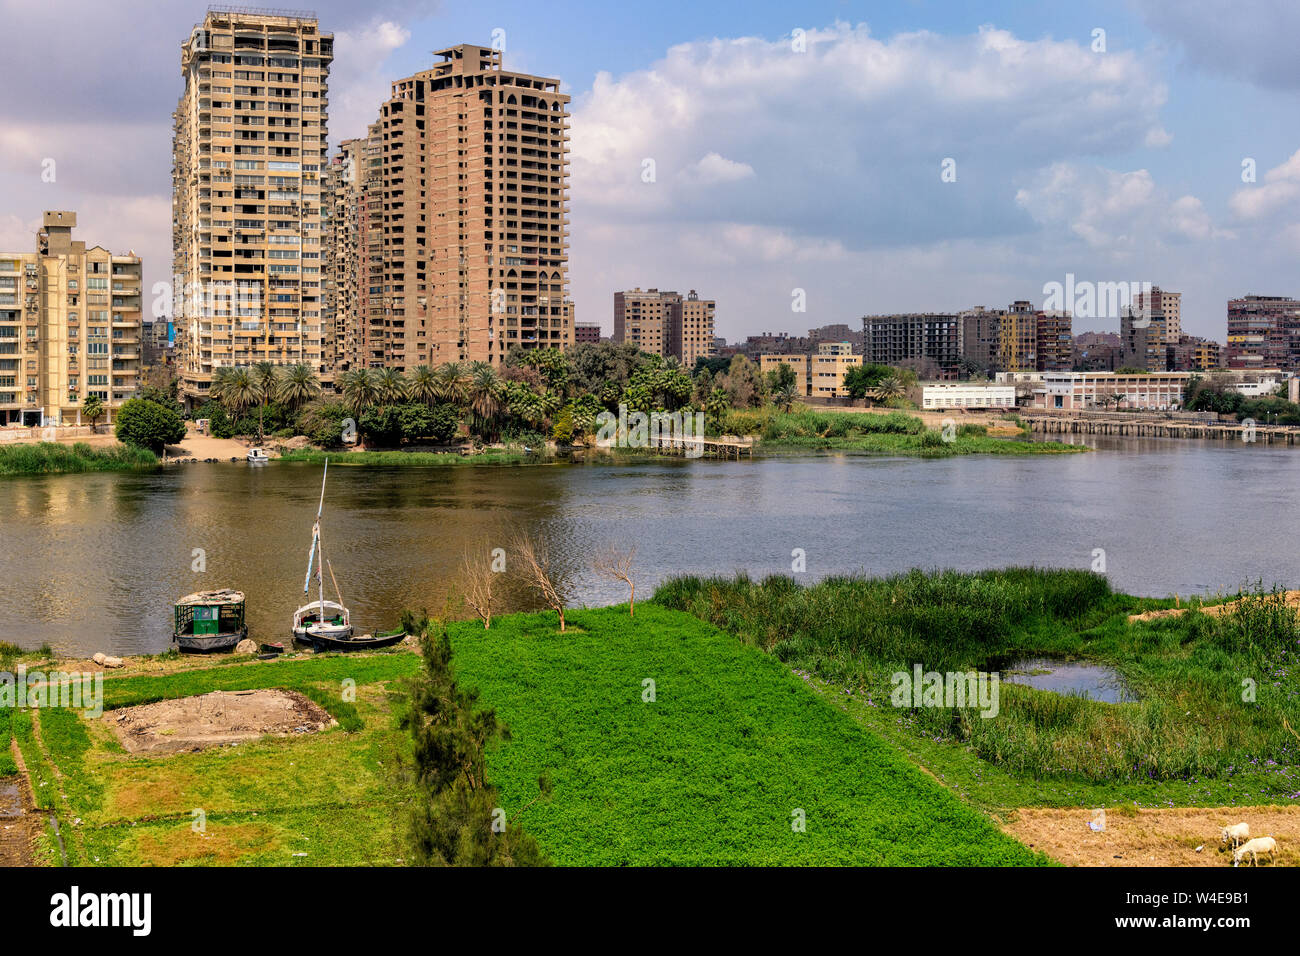 View of the rural island of Geziret El-Dahab in the Nile river from El-Monieb Bridge in Cairo Stock Photo